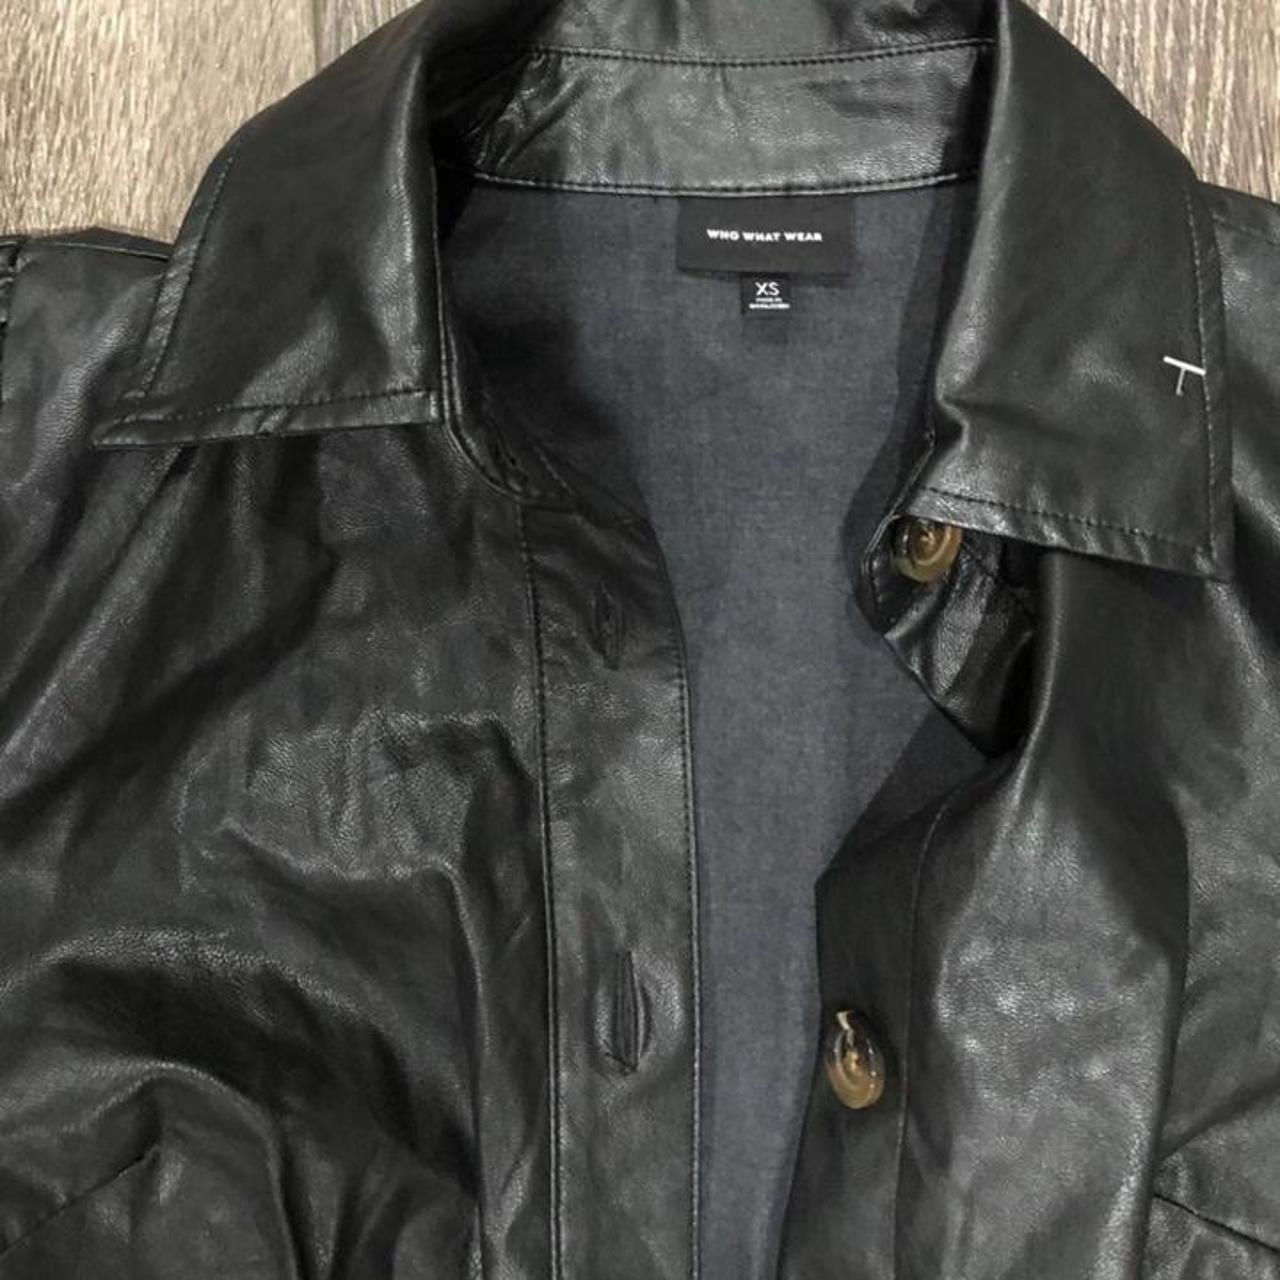 Faux leather trench coat - Depop